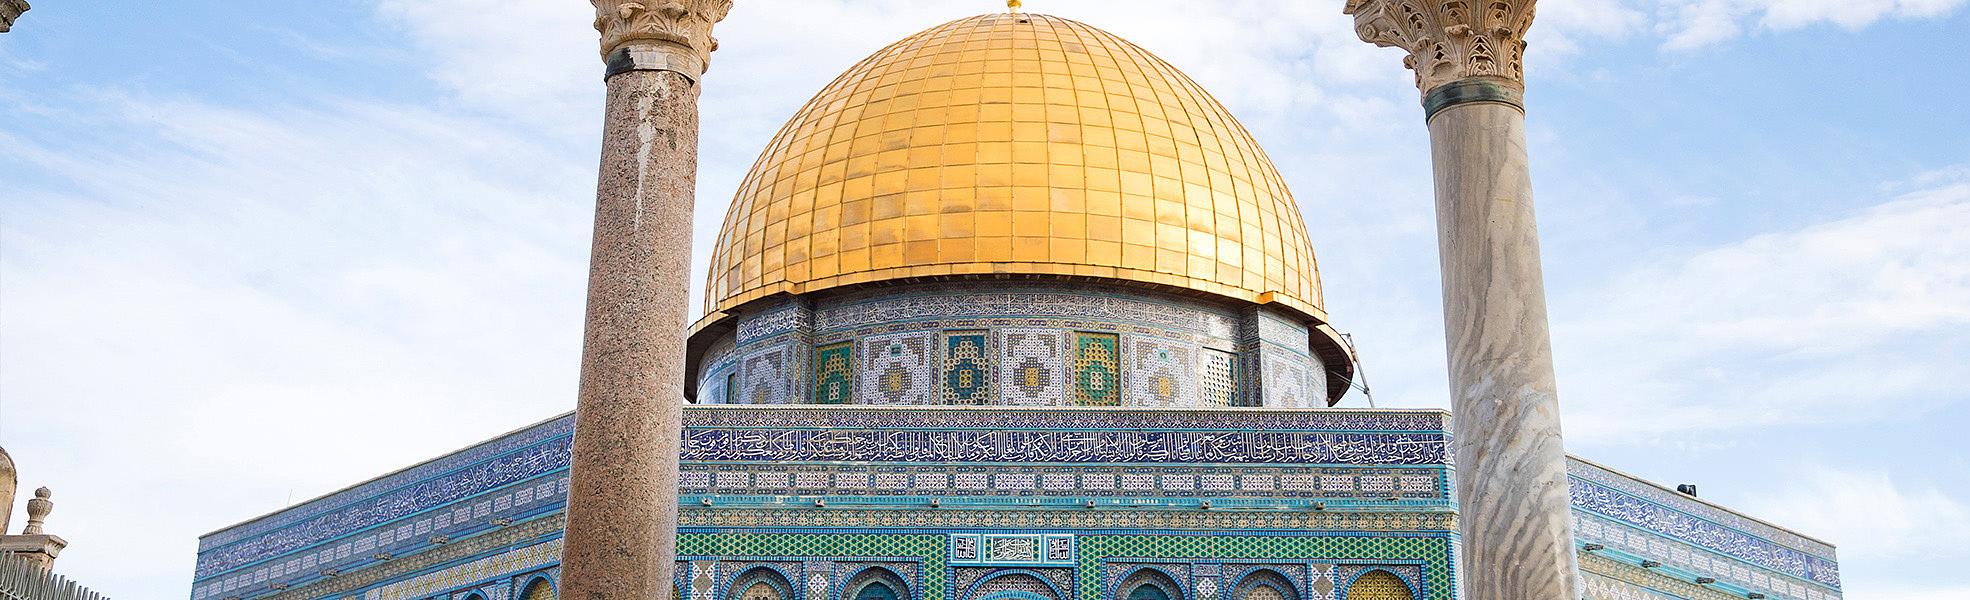 Unique Holy Land tours for slow walkers itinerary - EASY ISRAEL TOURS